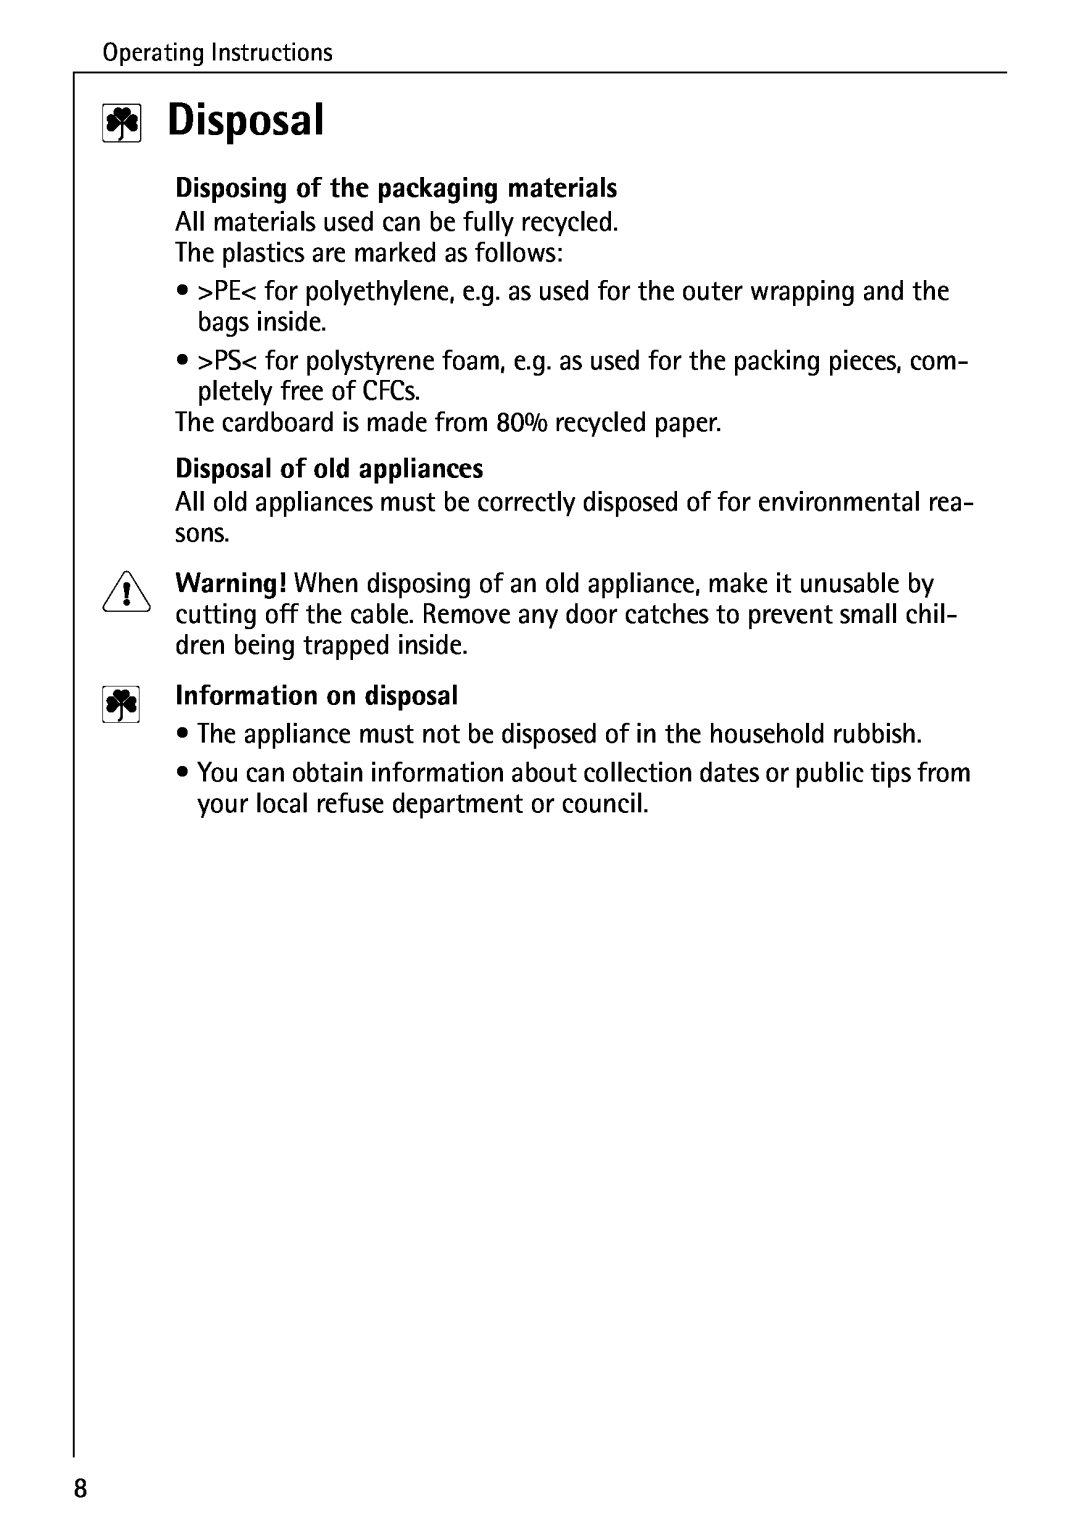 AEG 5033 V Disposing of the packaging materials, Disposal of old appliances, Information on disposal 